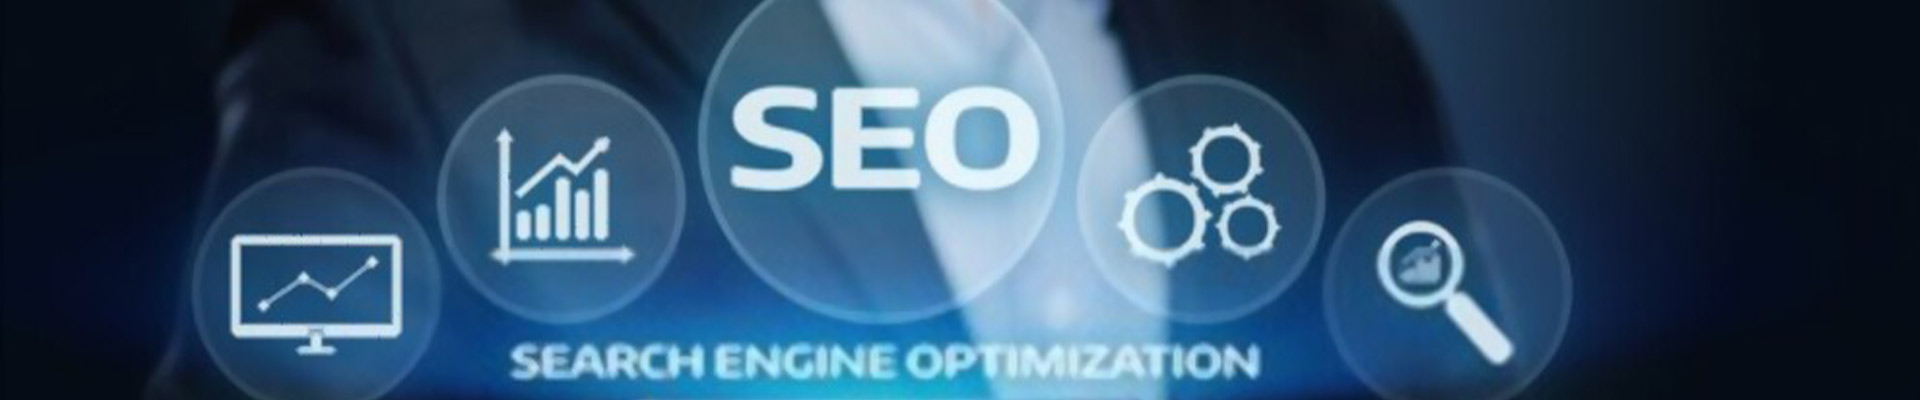 SEO Company London | SEO Services In London - Digitize Online